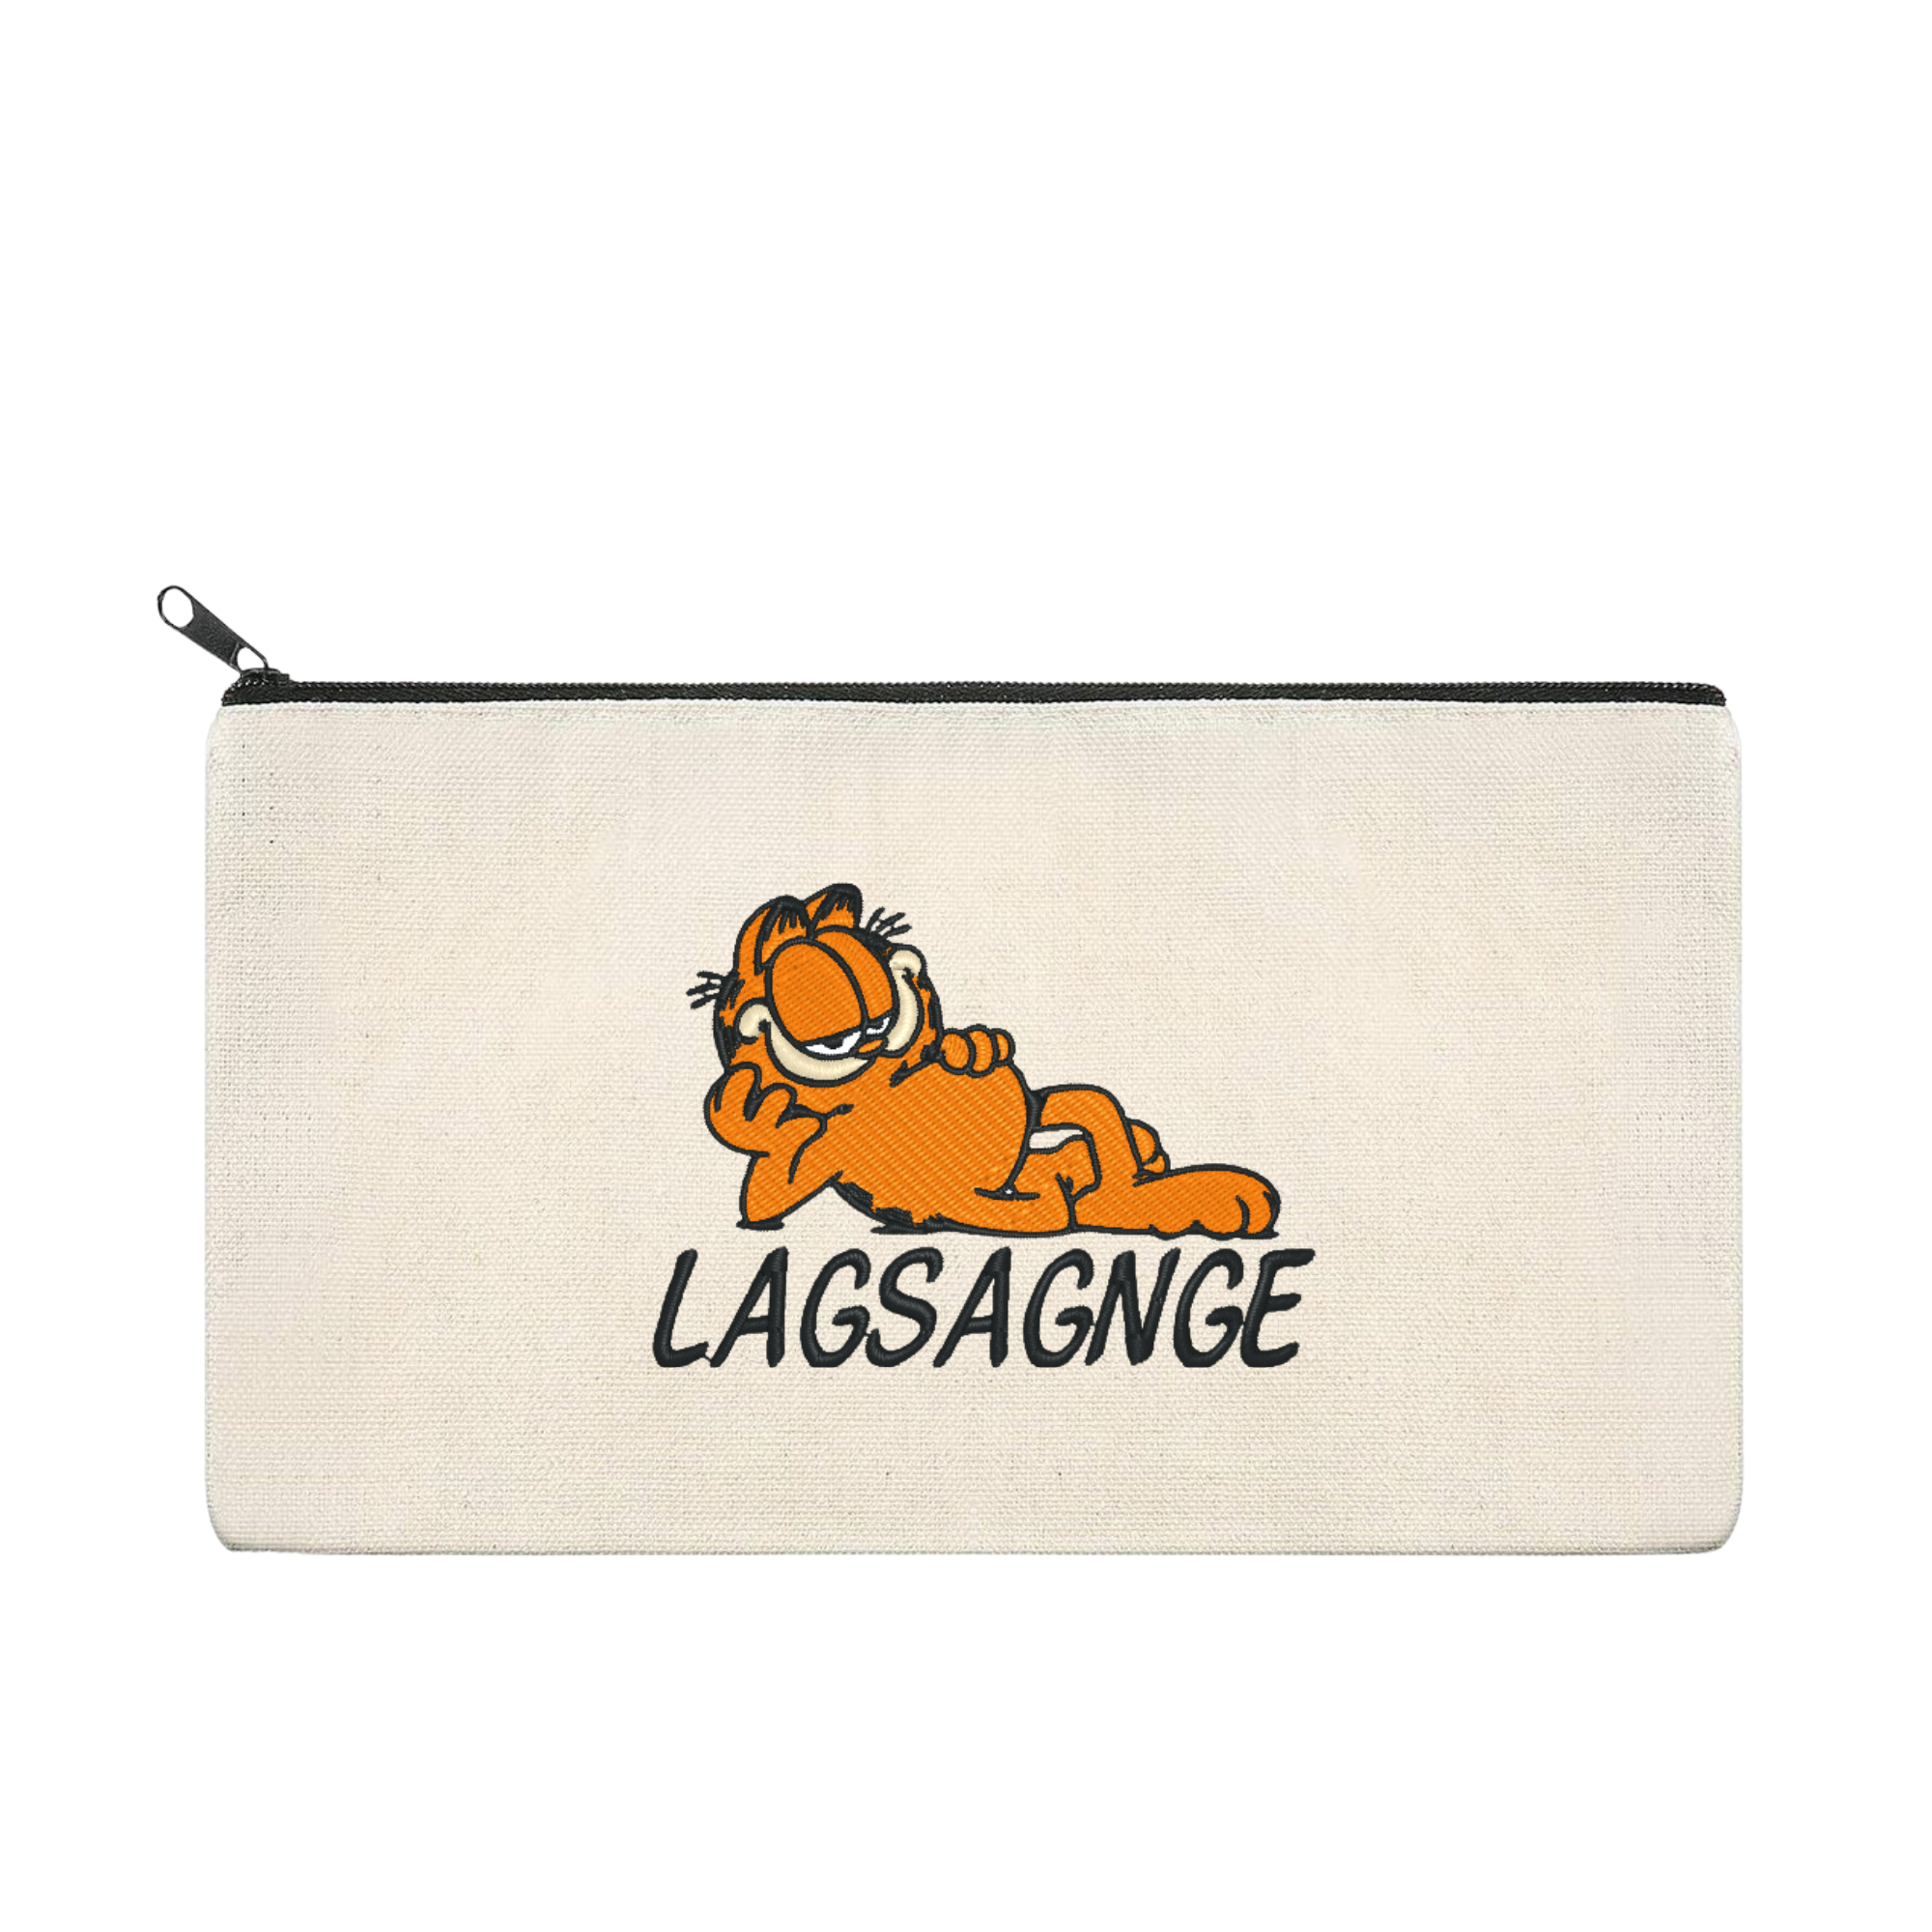 Garfield Lagsagnge Embroidered Multipurpose Zipper Pouch Bag